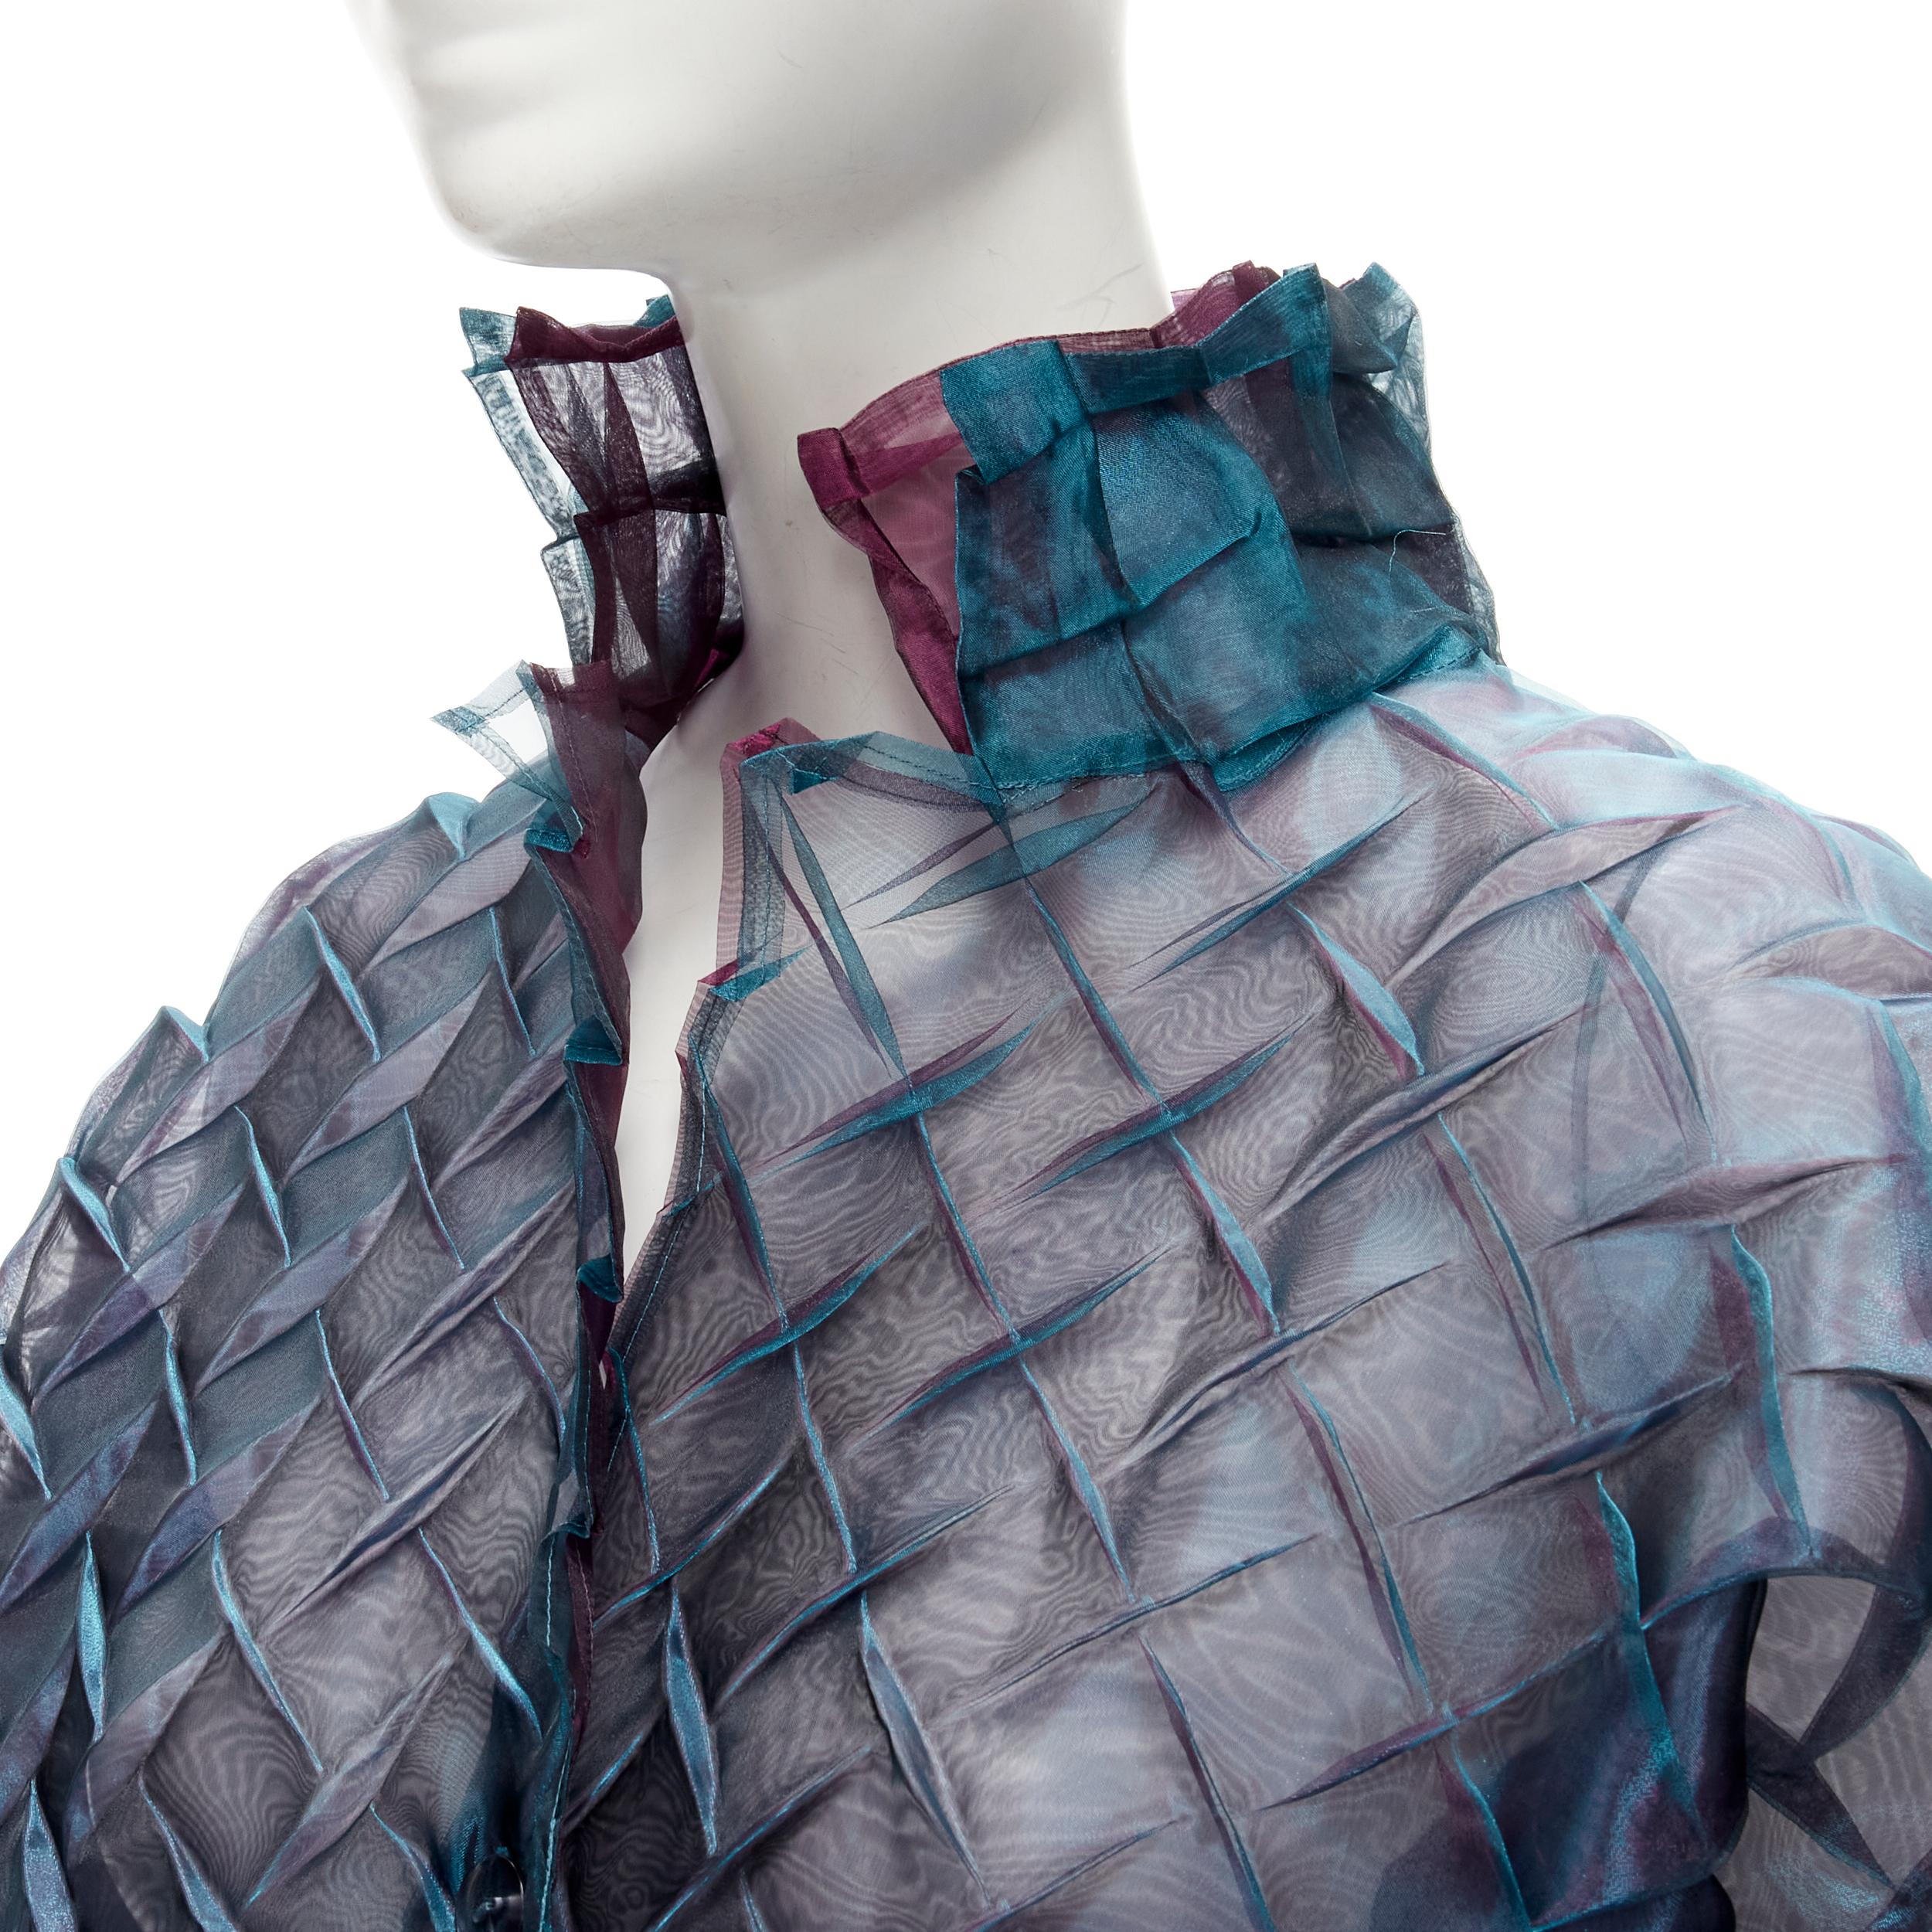 ISSEY MIYAKE iridescent blue textured layered sheer jacket top JP3 L
Reference: TGAS/C01761
Brand: Issey Miyake
Material: Polyester
Color: Blue
Pattern: Solid
Closure: Button
Made in: Japan

CONDITION:
Condition: Excellent, this item was pre-owned